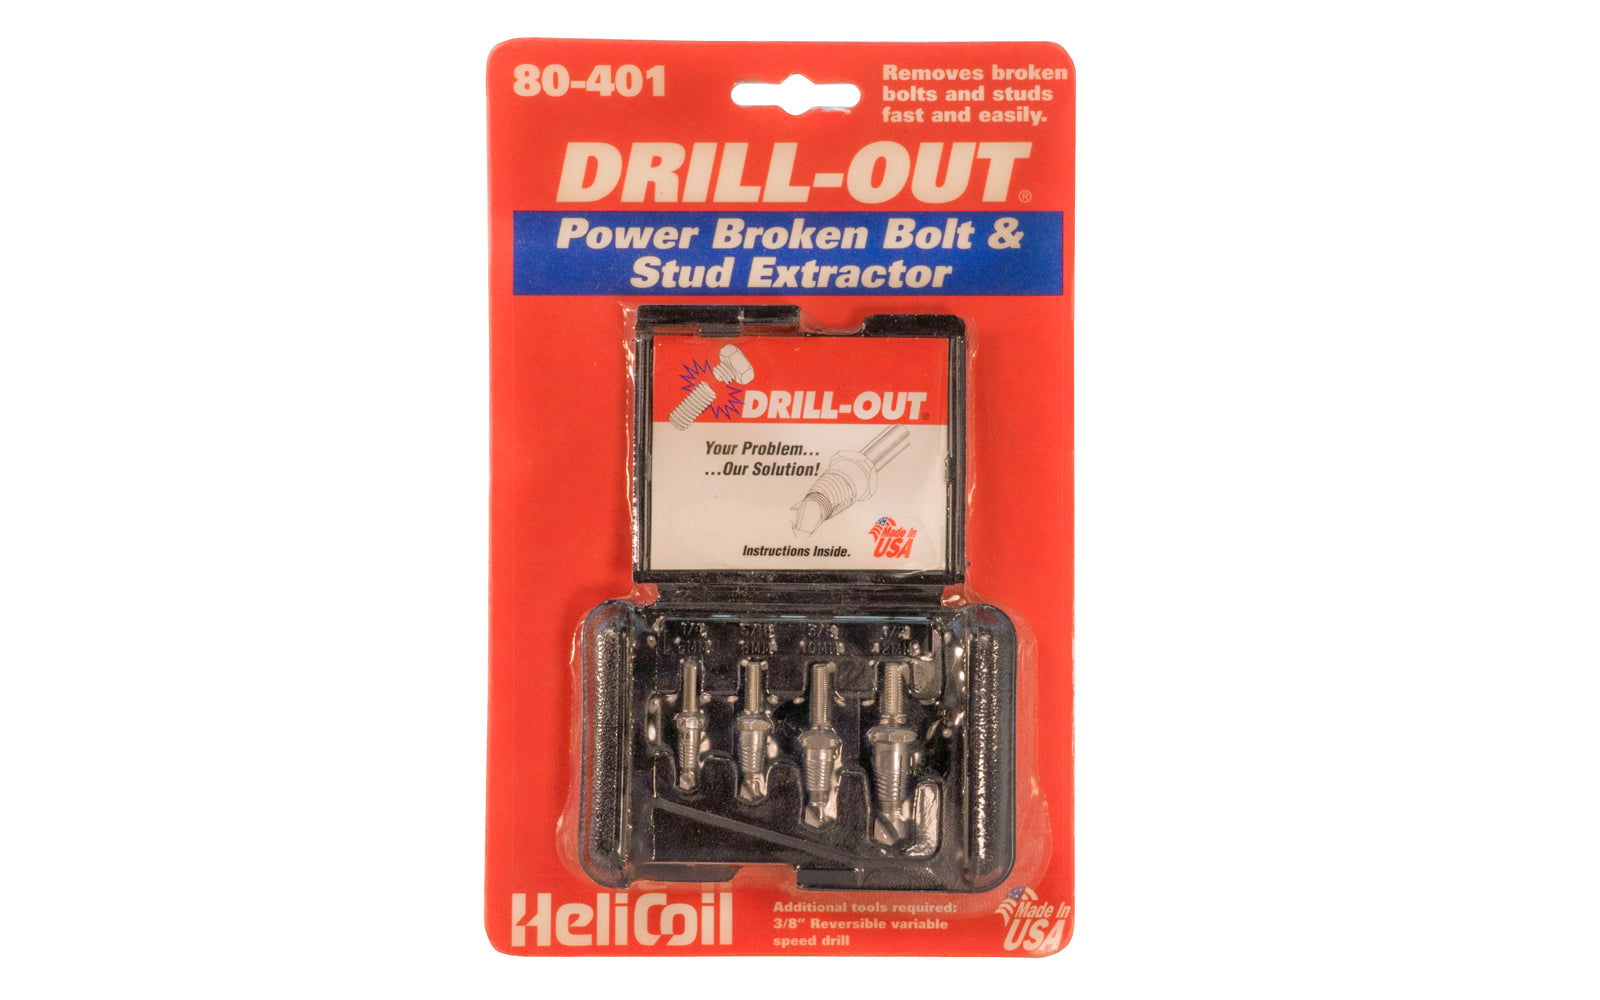 HeliColi Drill-Out. Power Broken Bolt & Stud Extractor Set. 1/4